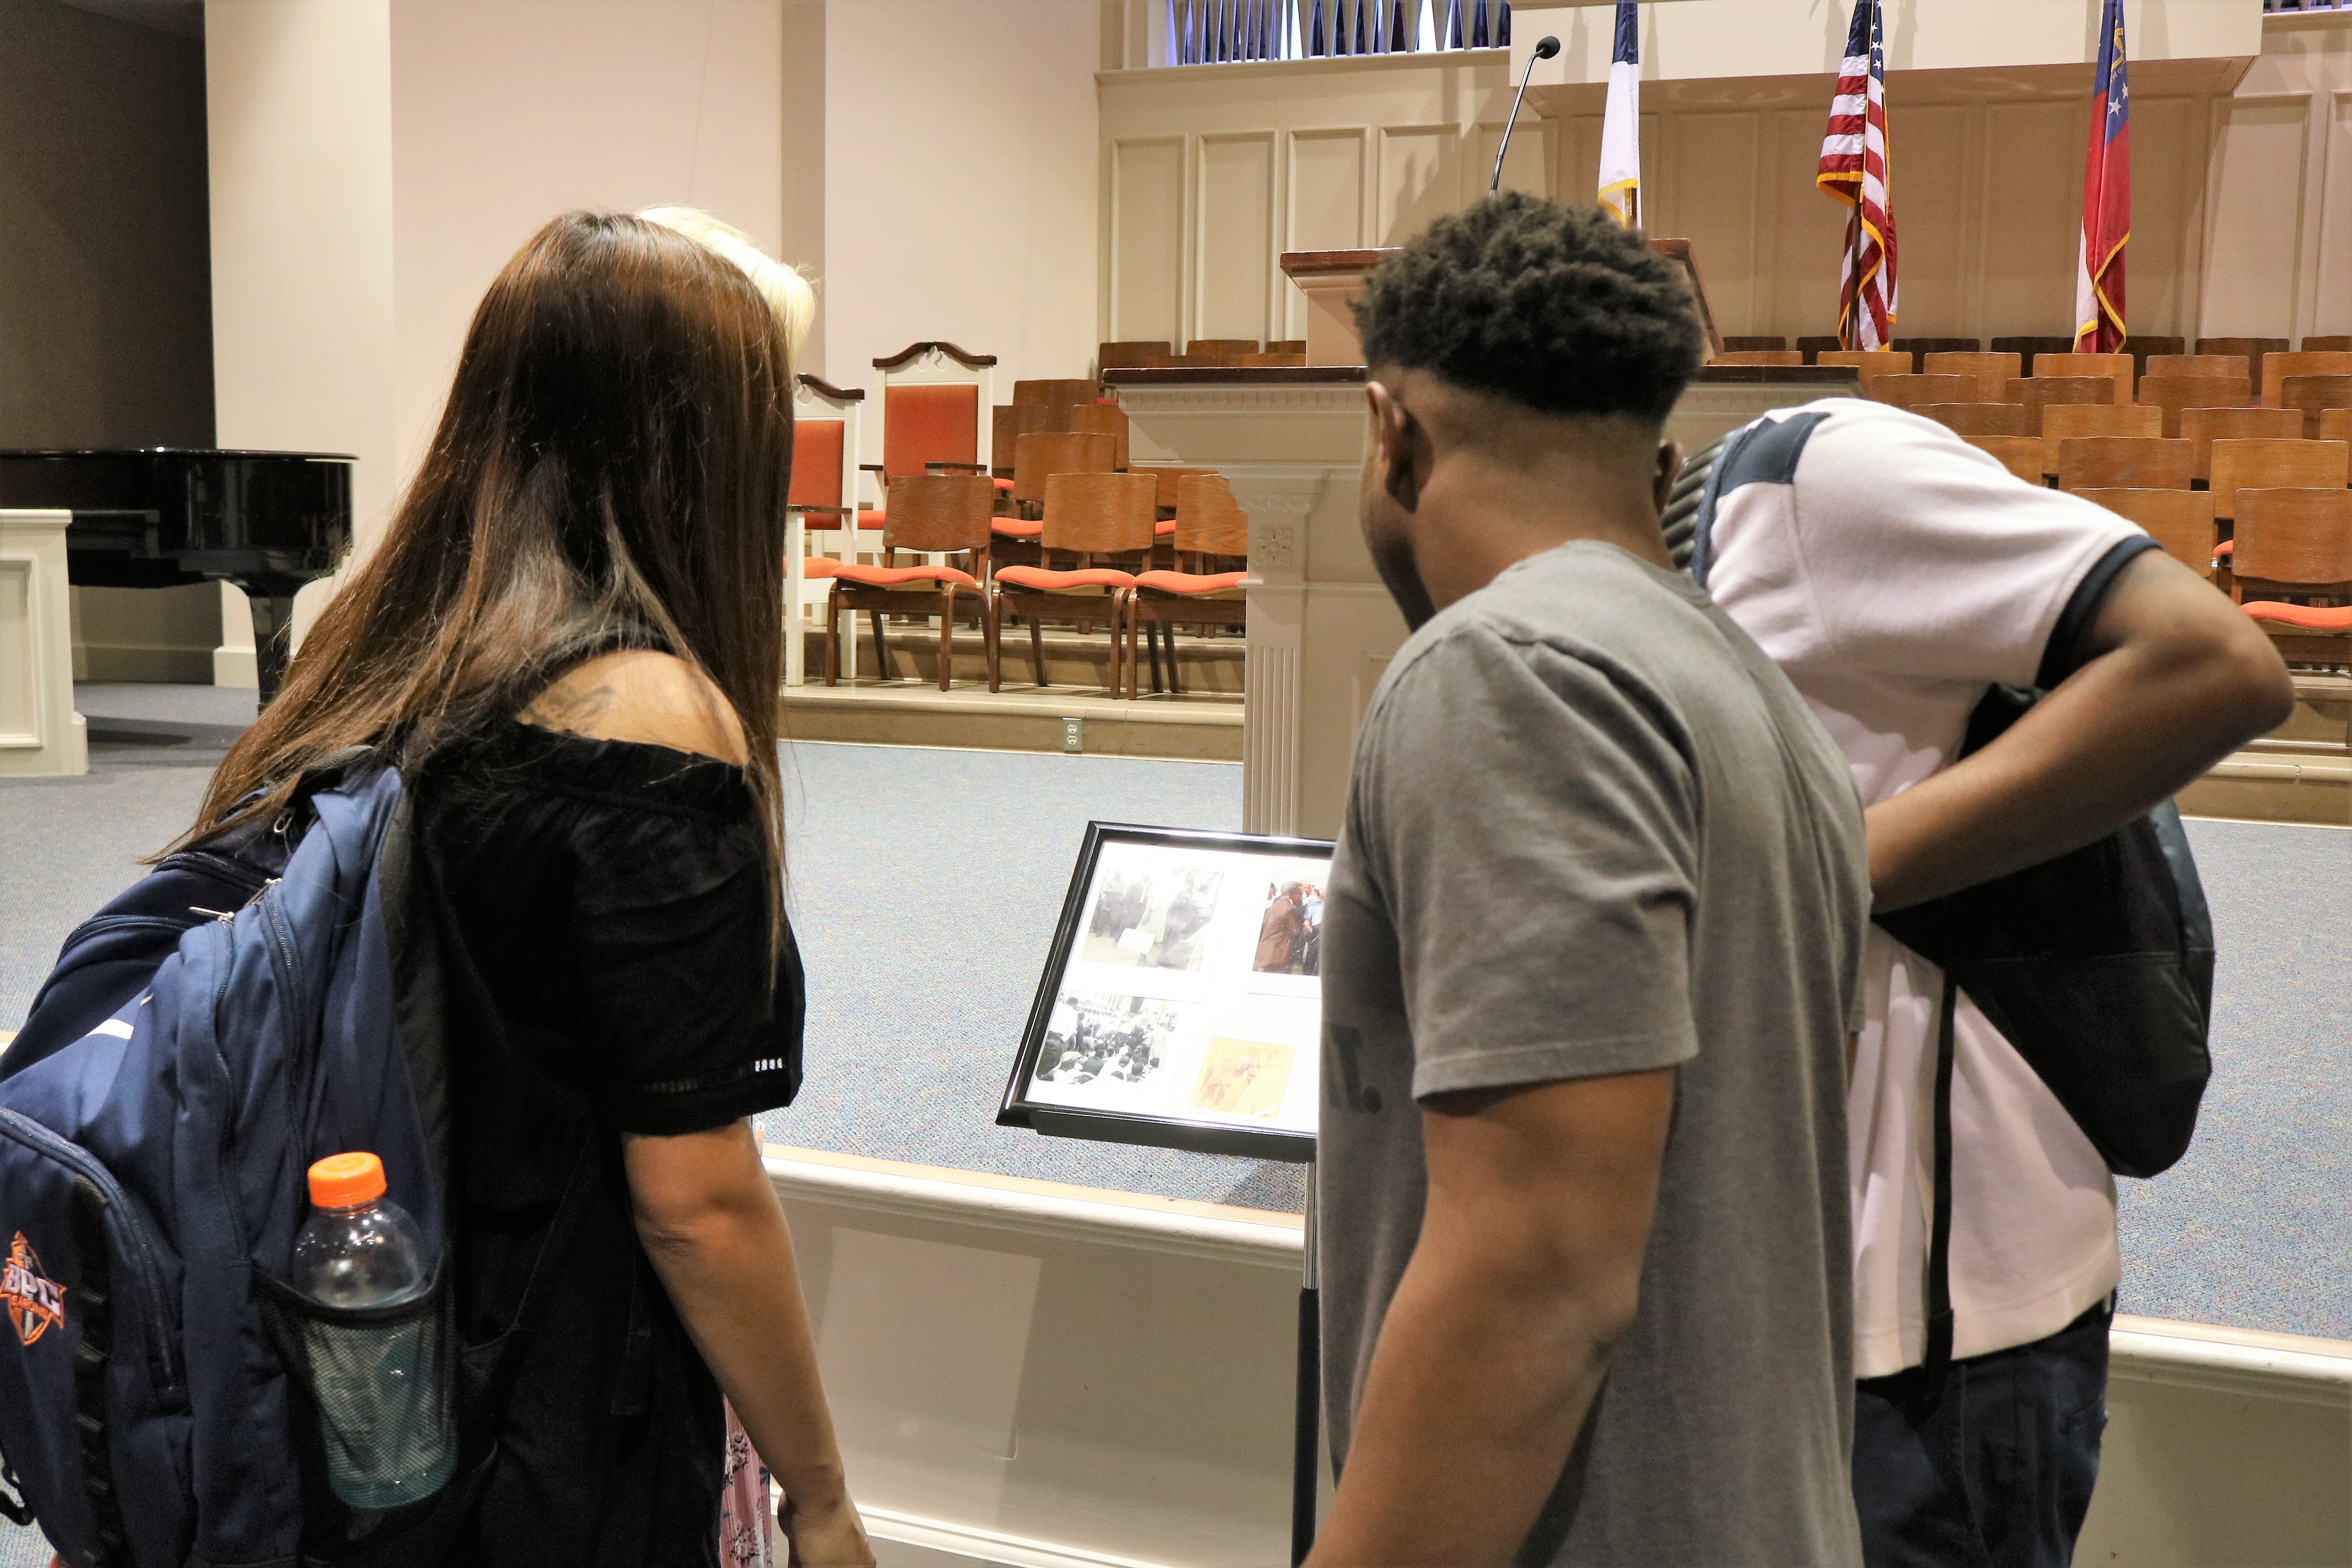 Dr. F. Lee Carter shared about his experiences working alongside Dr. Martin Luther King, Jr. at the April 3 Brewton-Parker chapel service. Photo Credit: Morgan Page